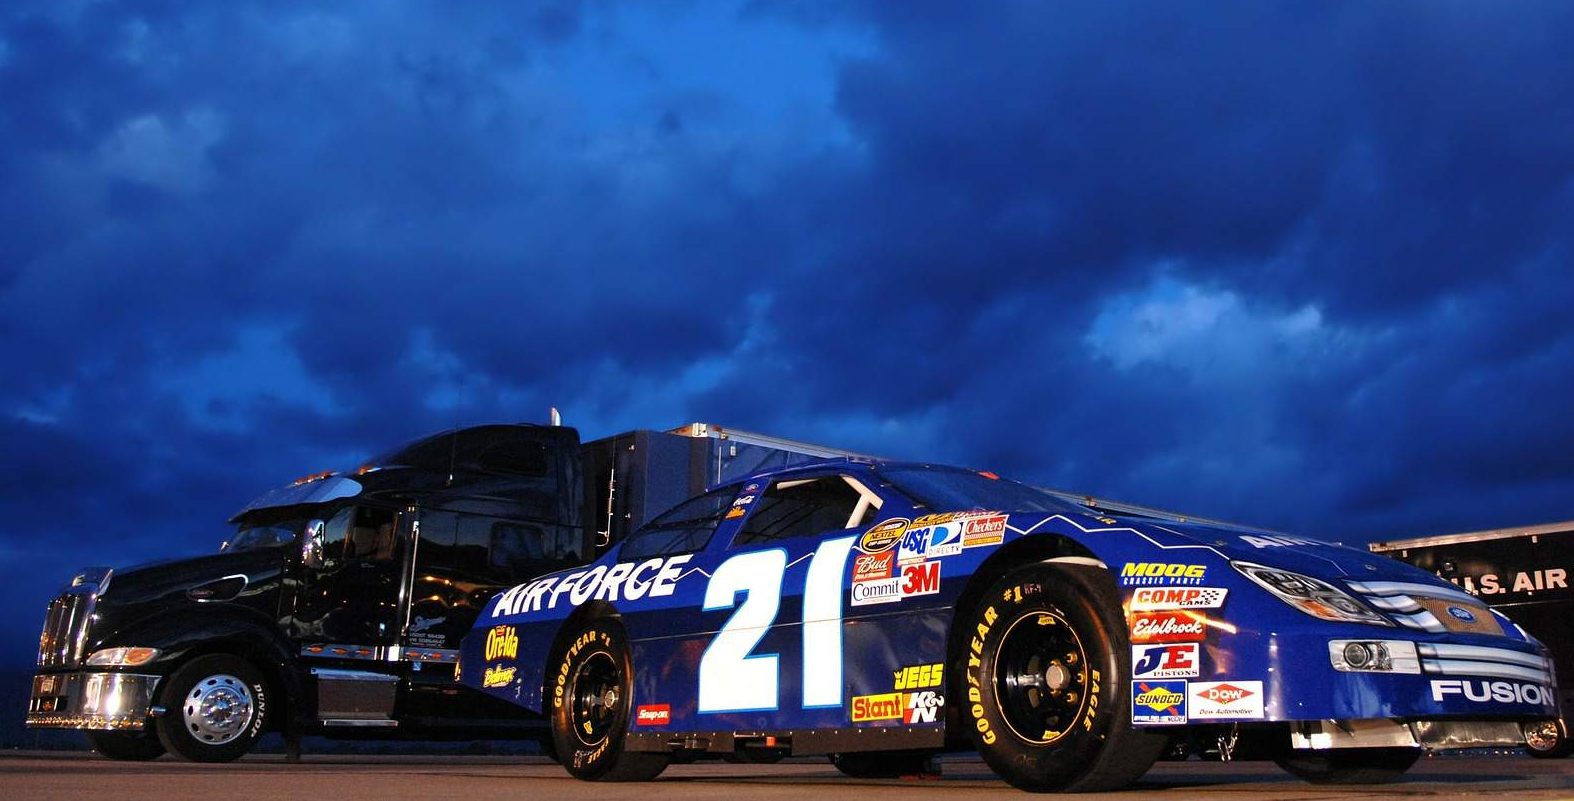 NASCAR Vrooms Into The Age Of  EVs With All-Electric Truck Delivery